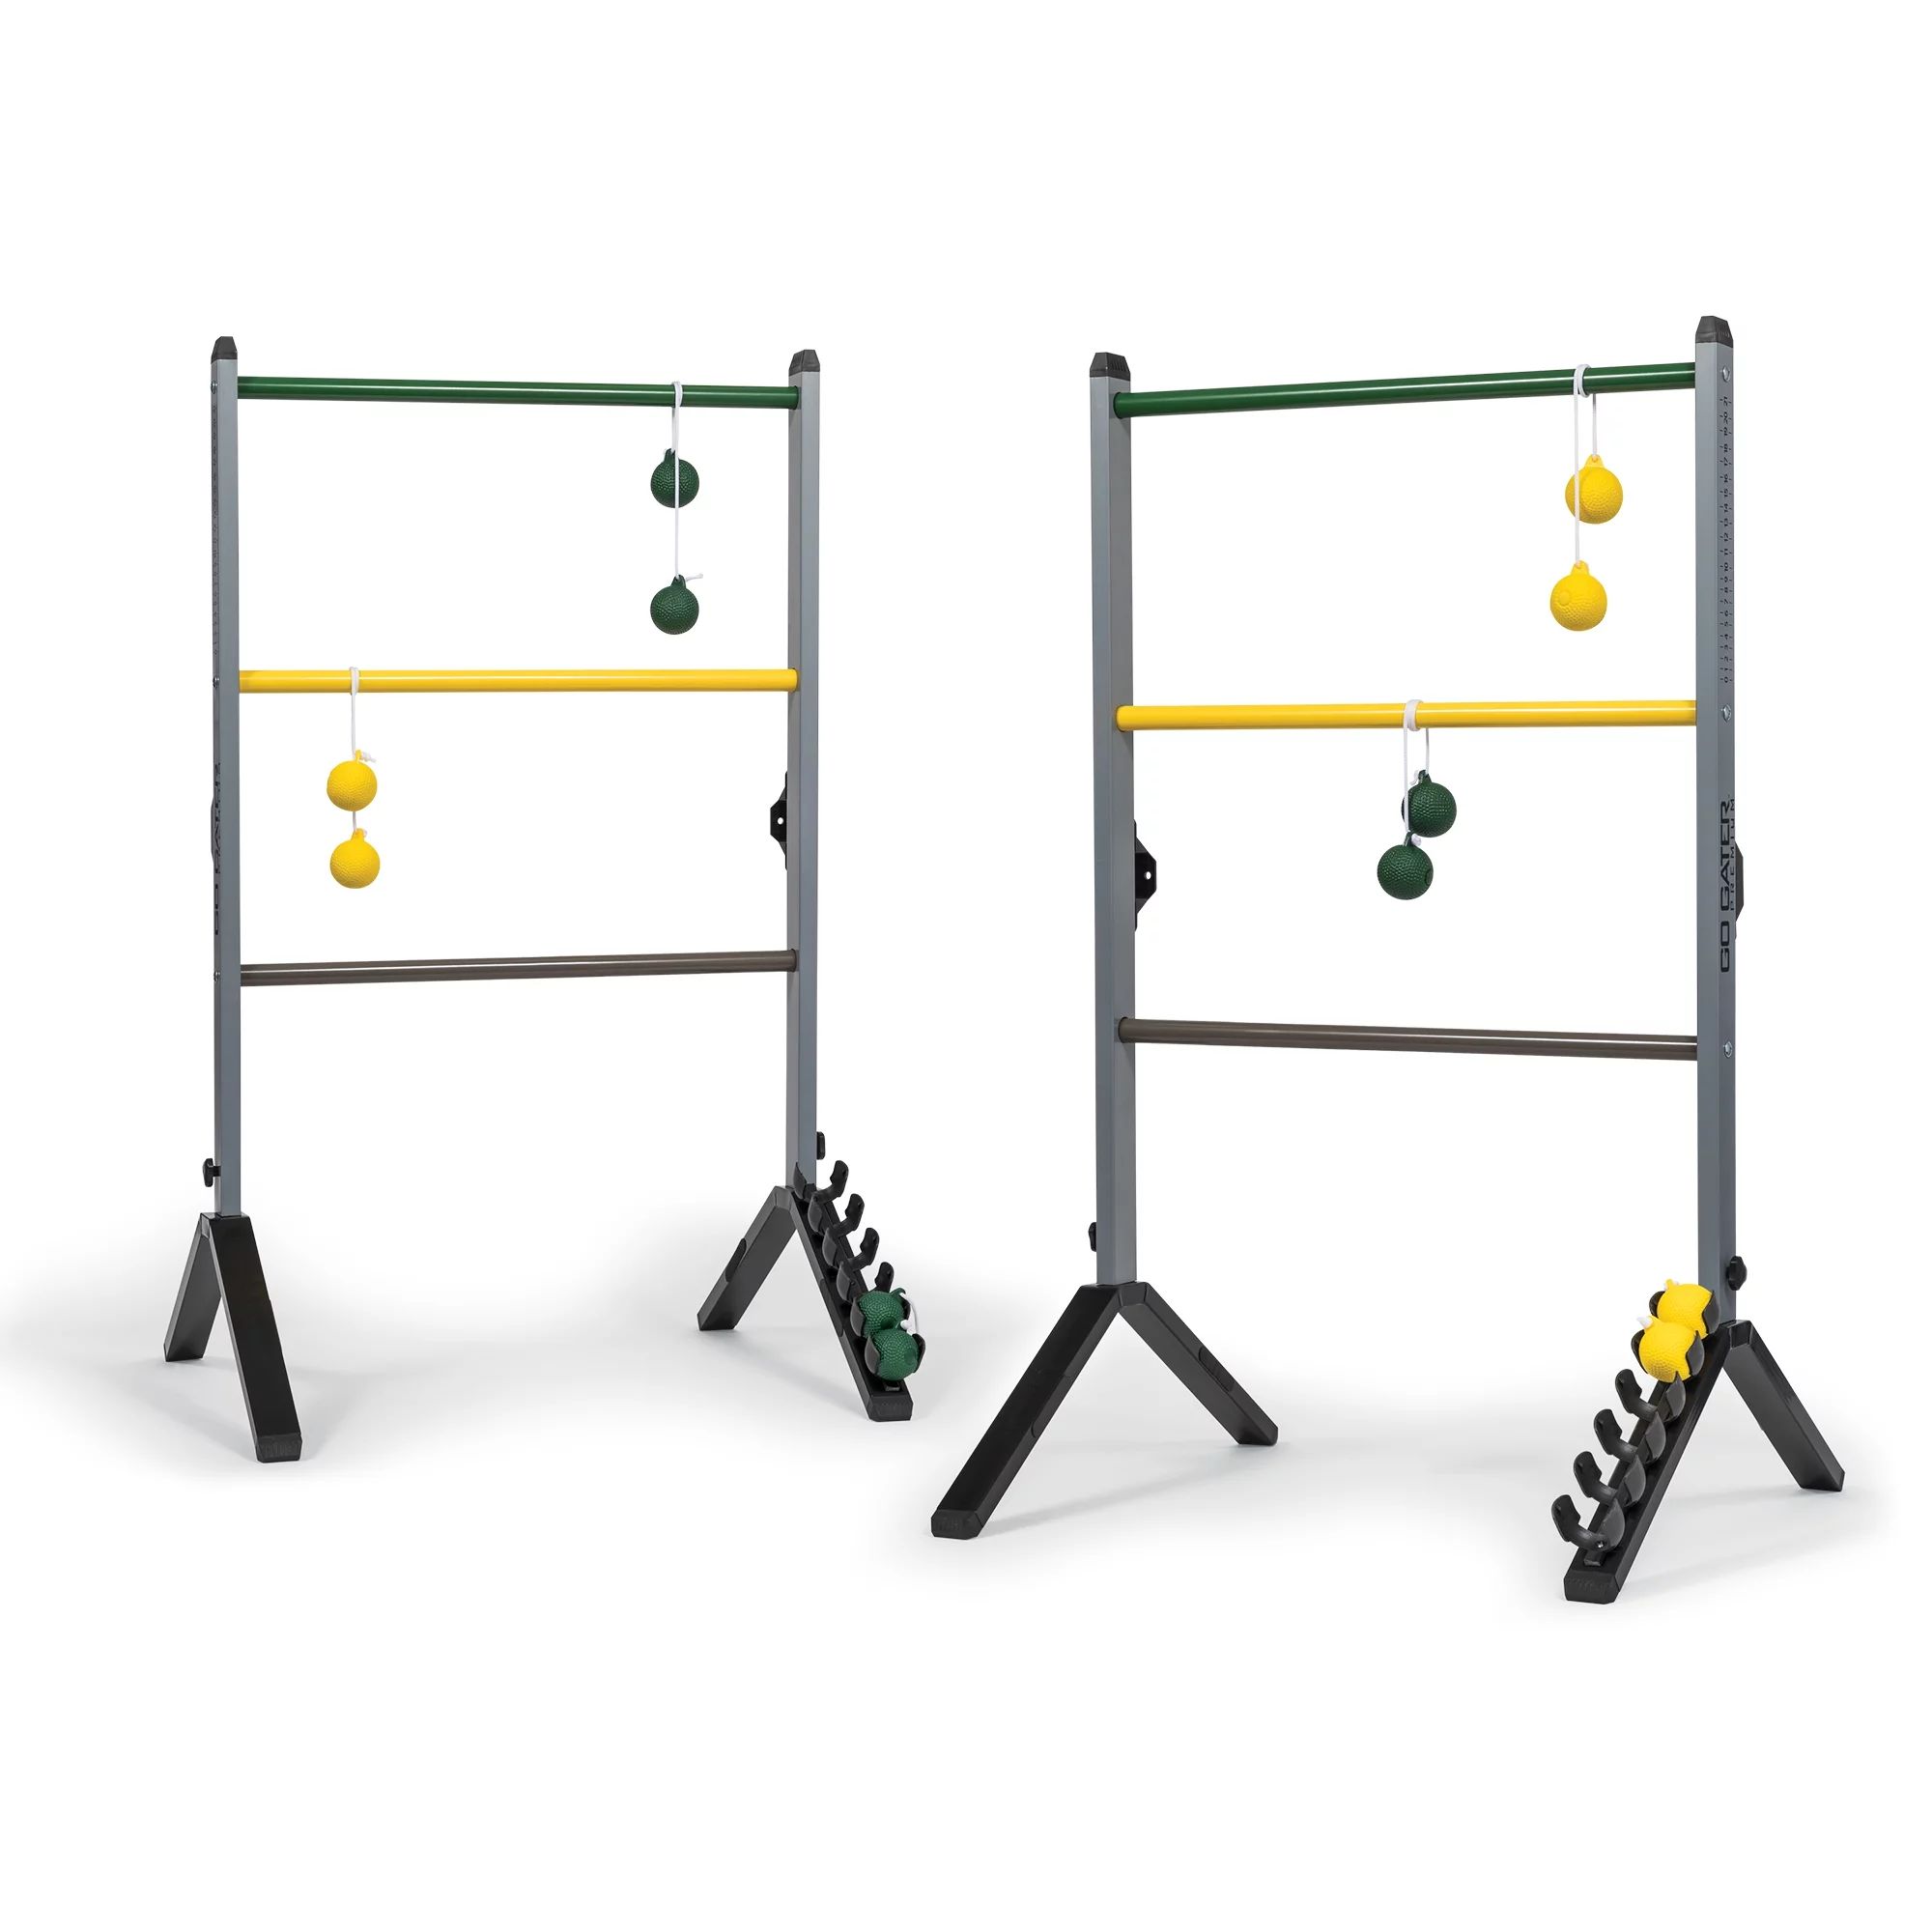 Go! Gater Premium Steel Ladderball Set with Built-in Scoring System – Perfect for Backyard, Bea... | Walmart (US)